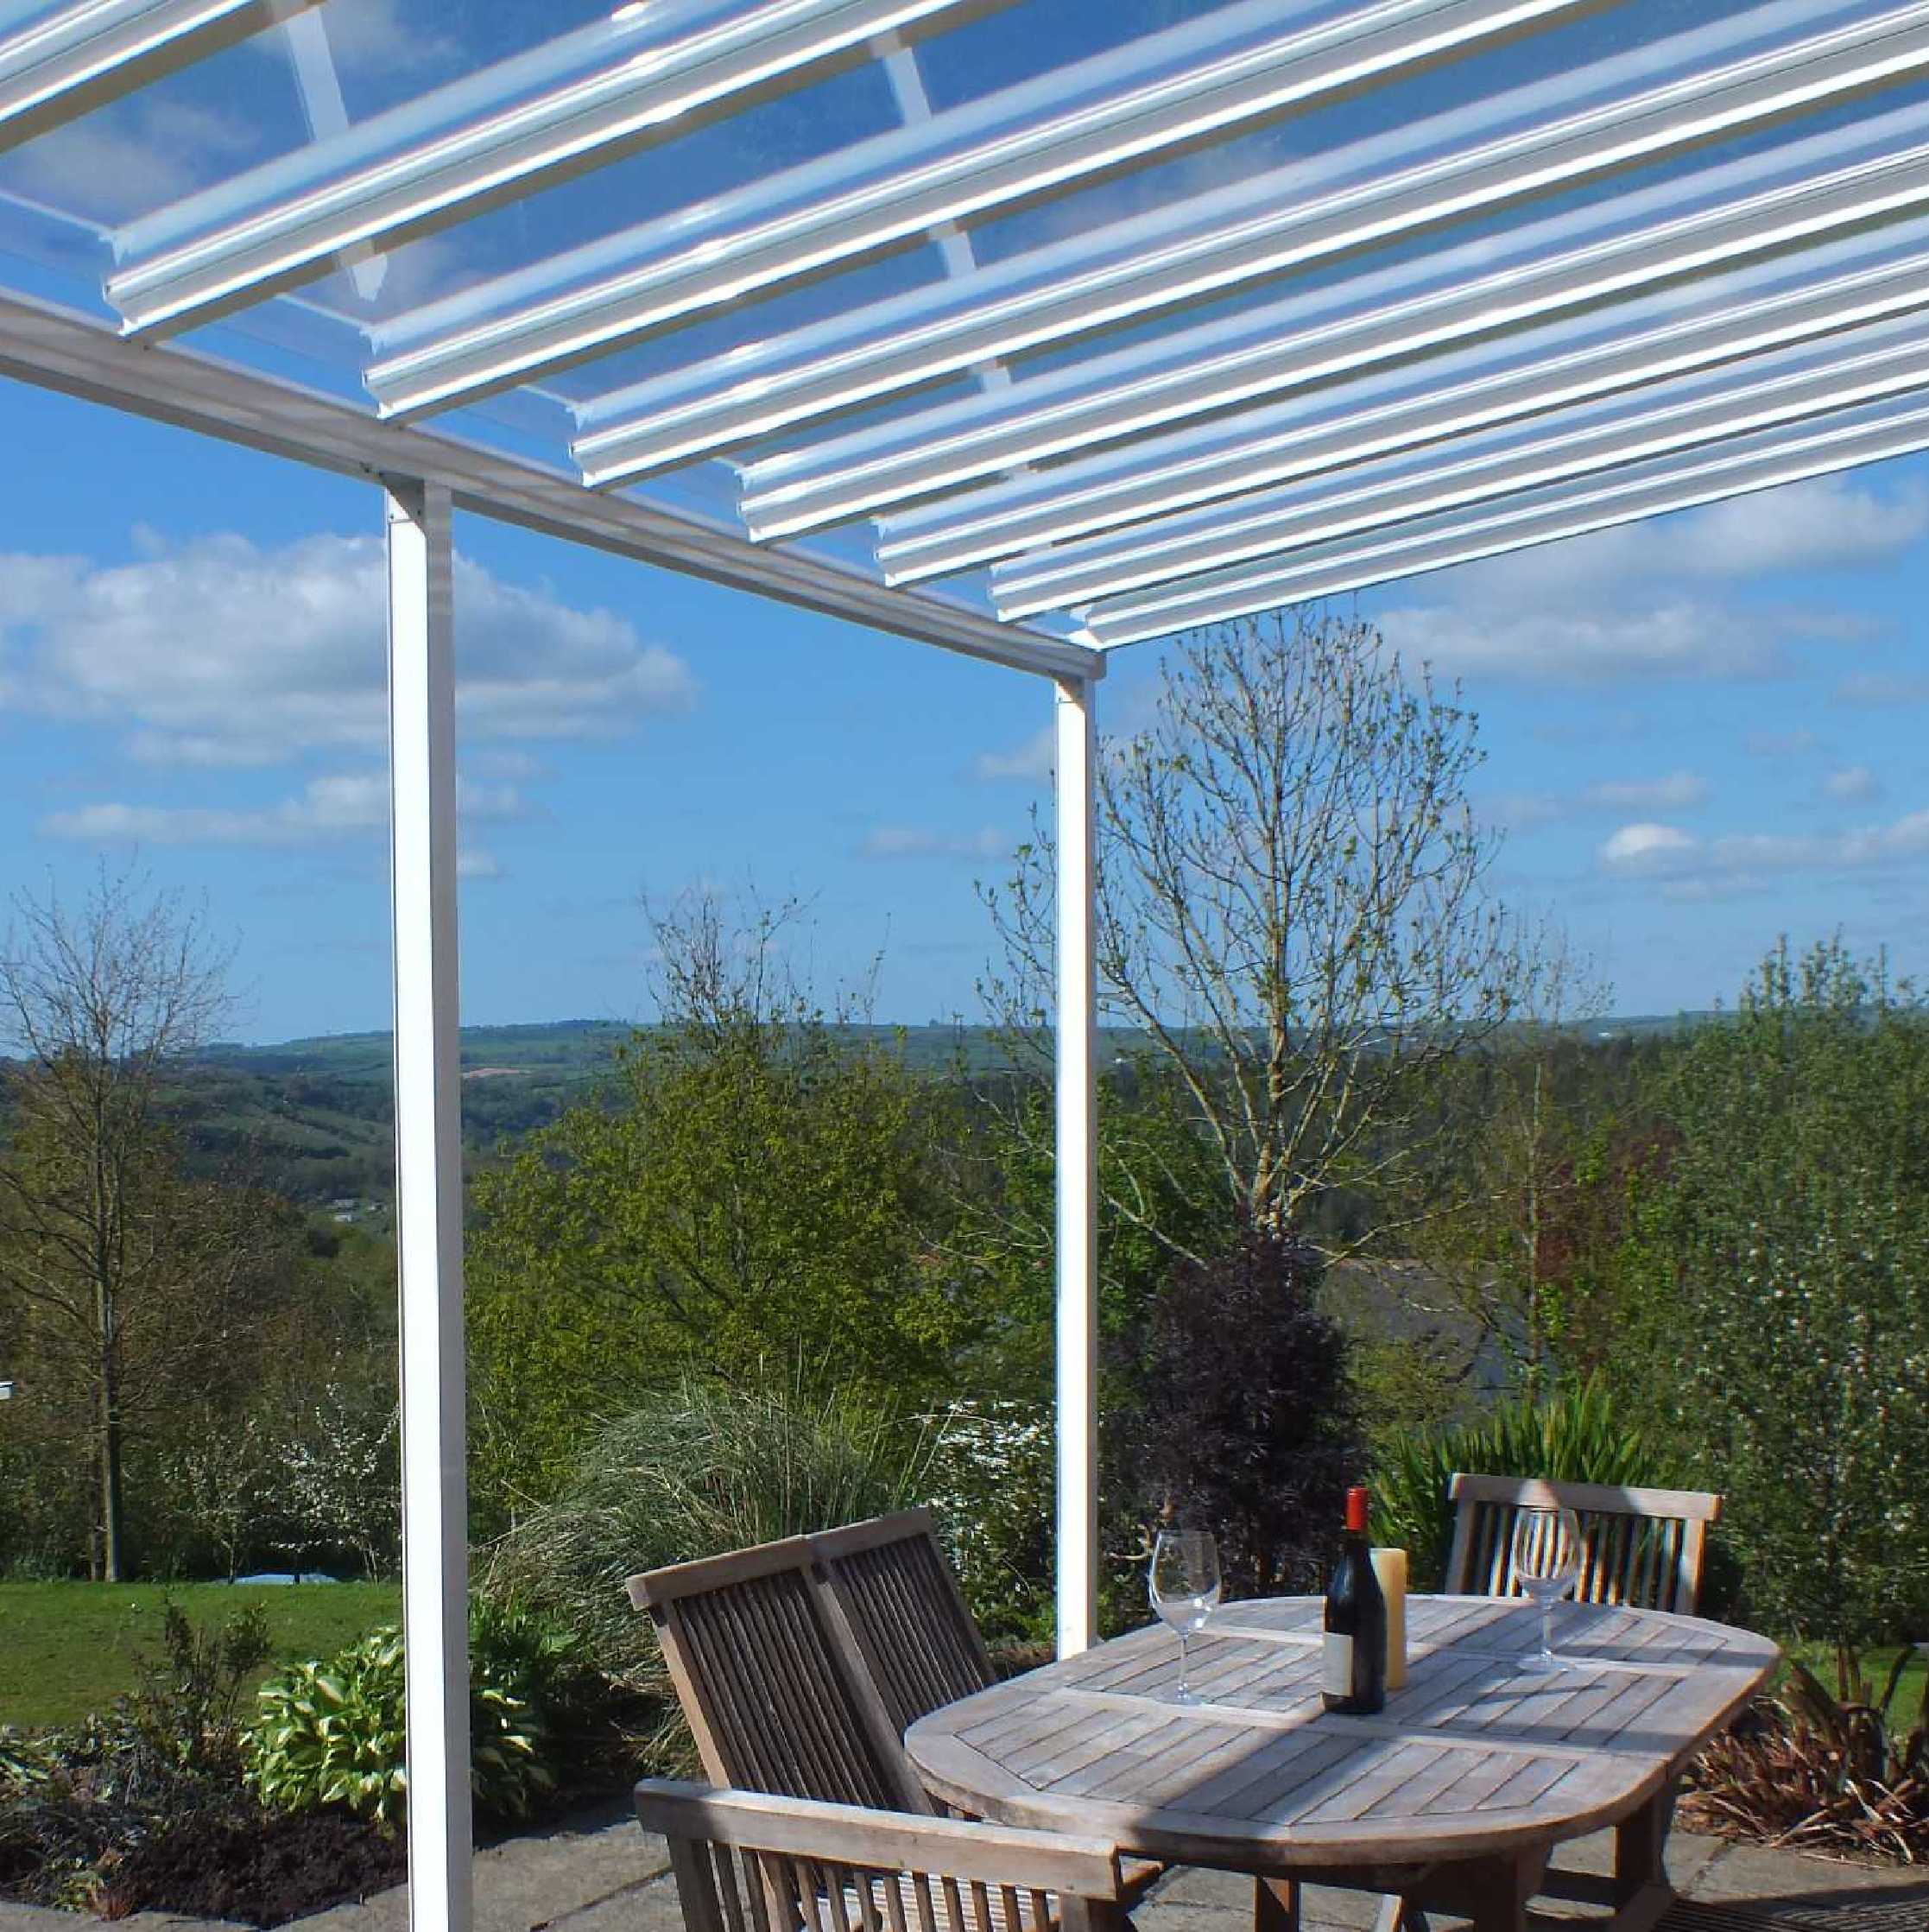 Buy Omega Smart Lean-To Canopy, White UNGLAZED for 6mm Glazing - 7.0m (W) x 2.0m (P), (4) Supporting Posts online today